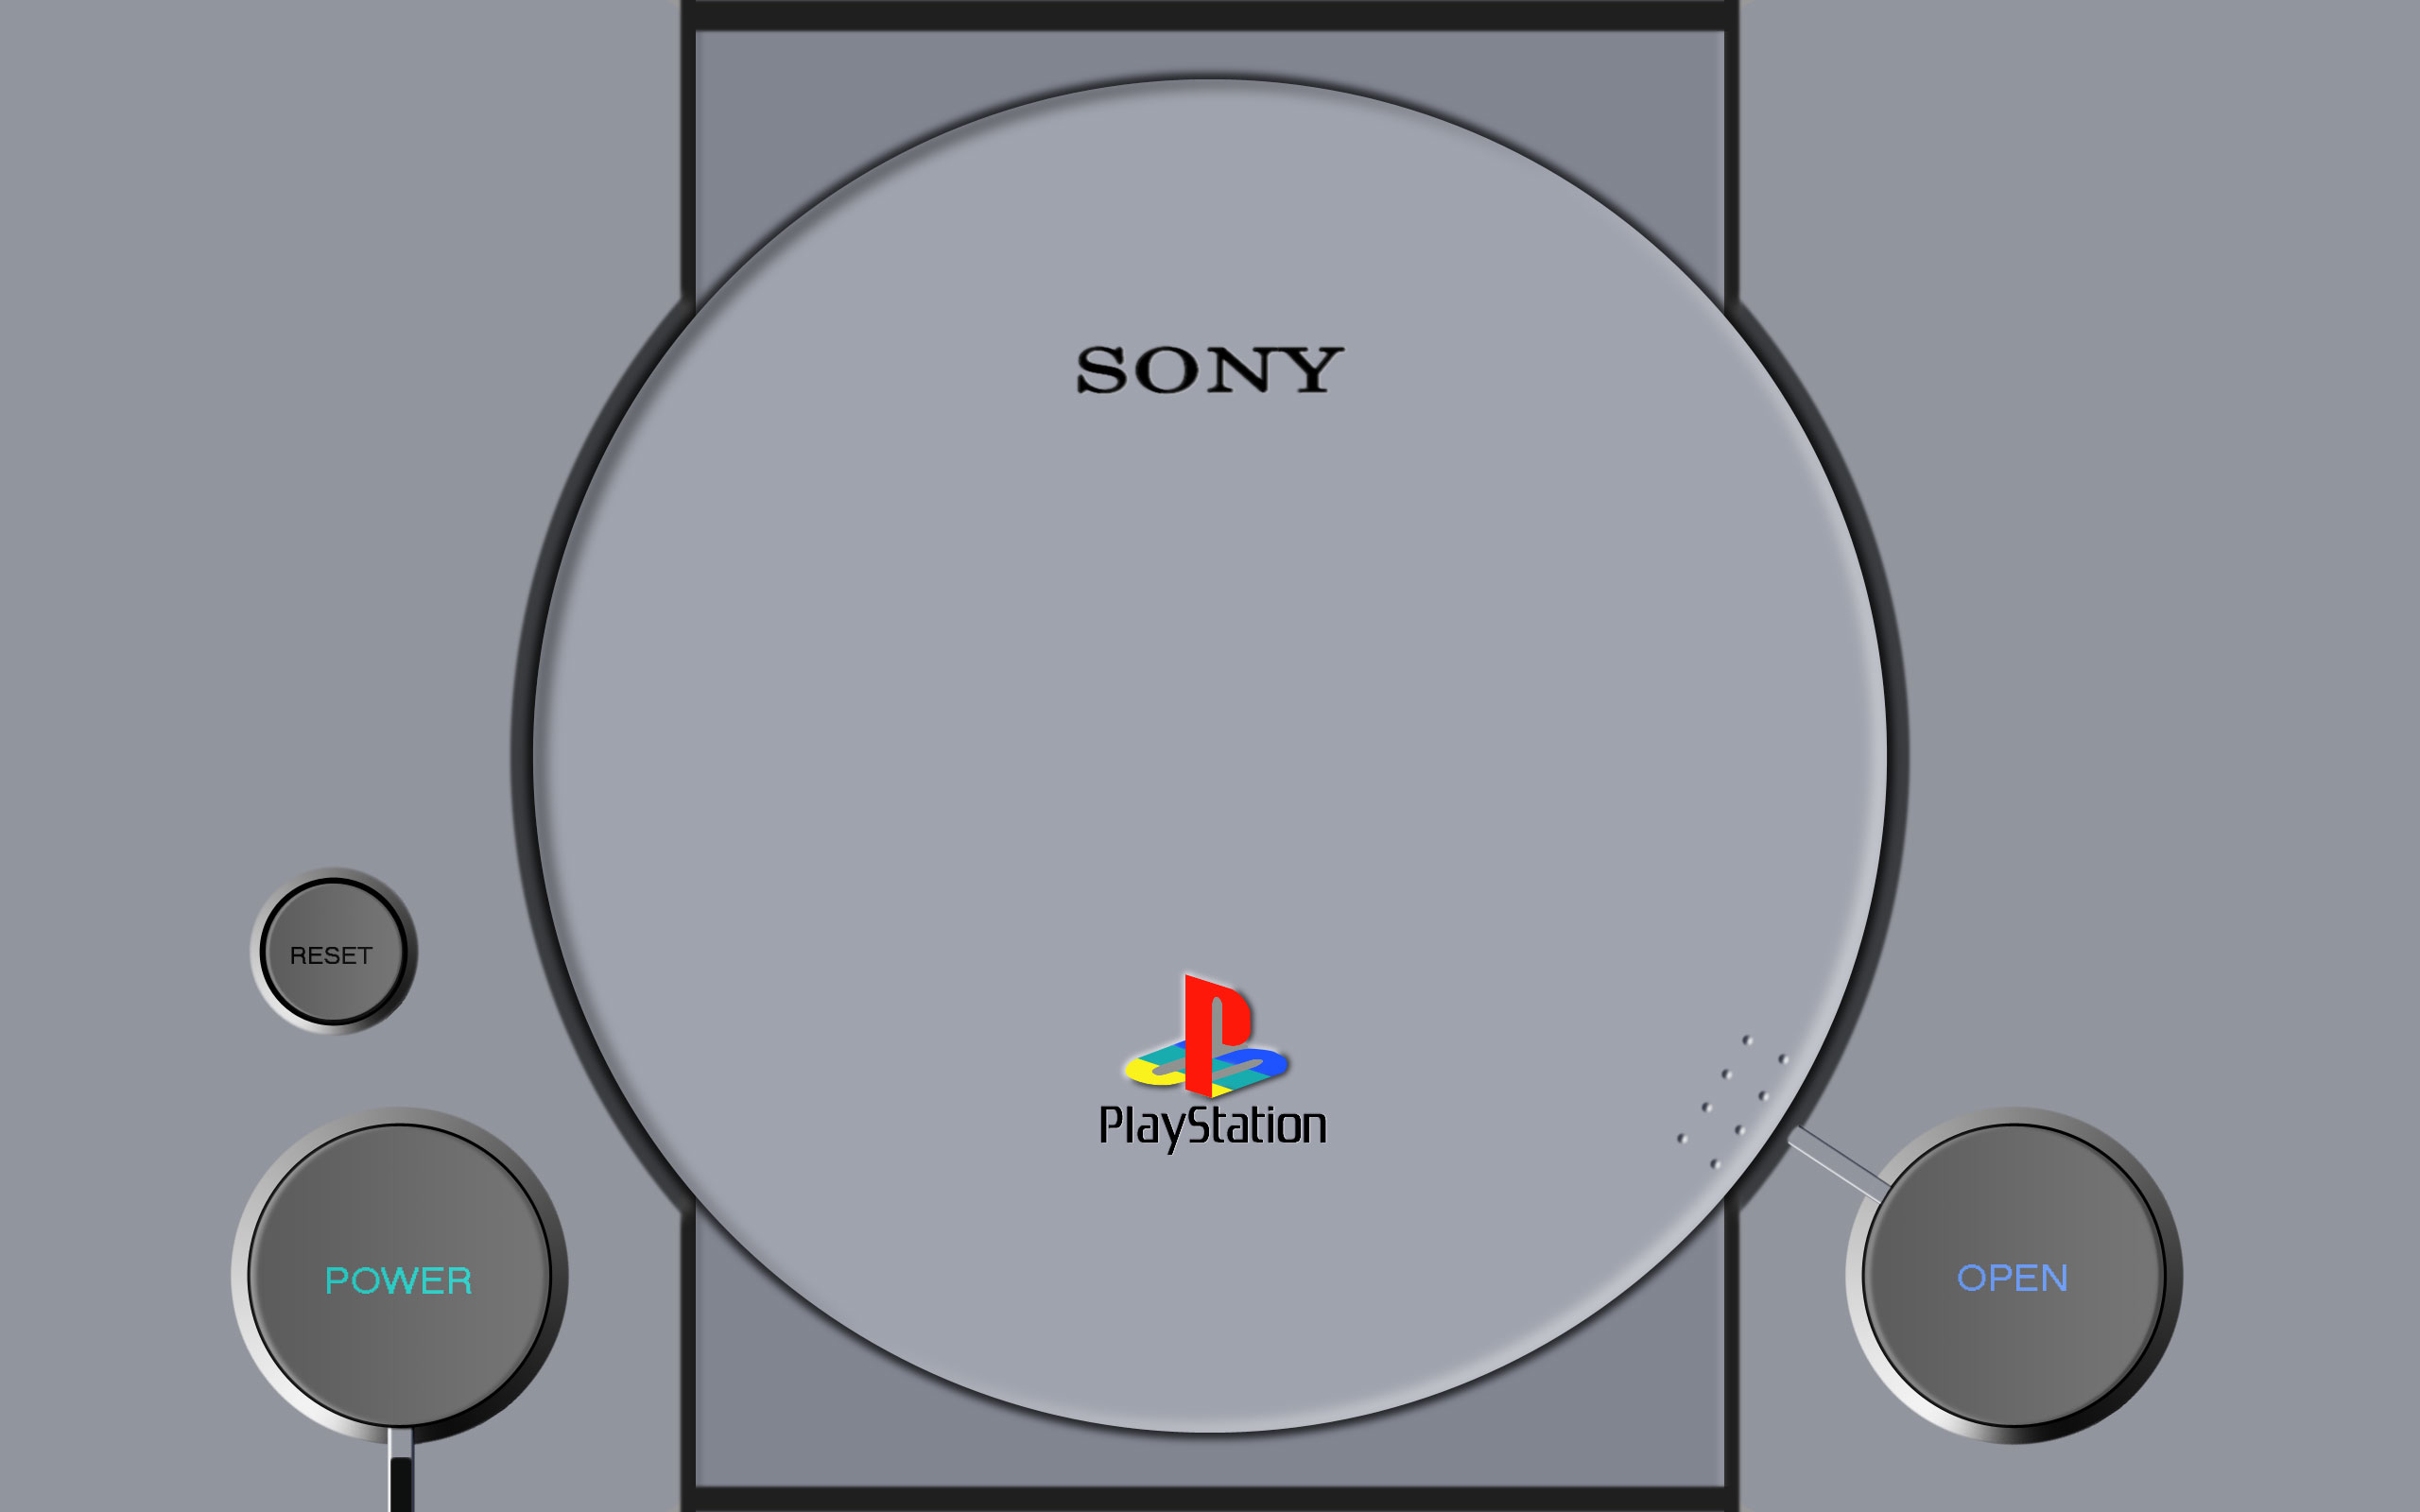 Original Sony PlayStation hd wallpaper background HD Wallpapers 2560x1600